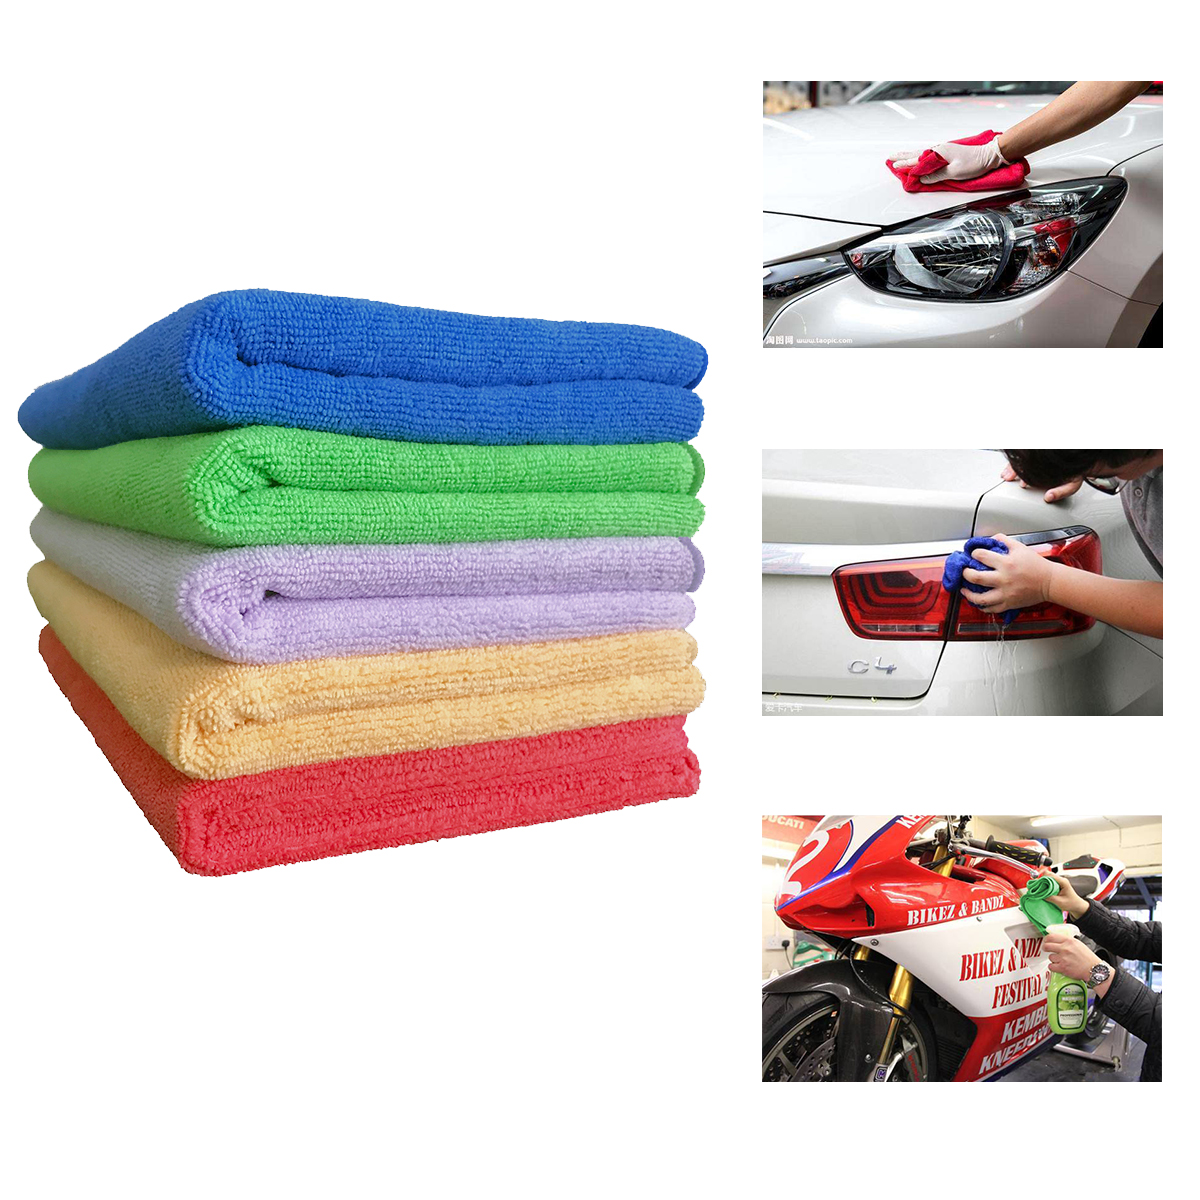 8 Year Exporter Microfiber Mop Head - Microfibre cleaning cloth-Multi-purpose-Car cleaning-Vehicle cleaning  – AKTIVKOHLE